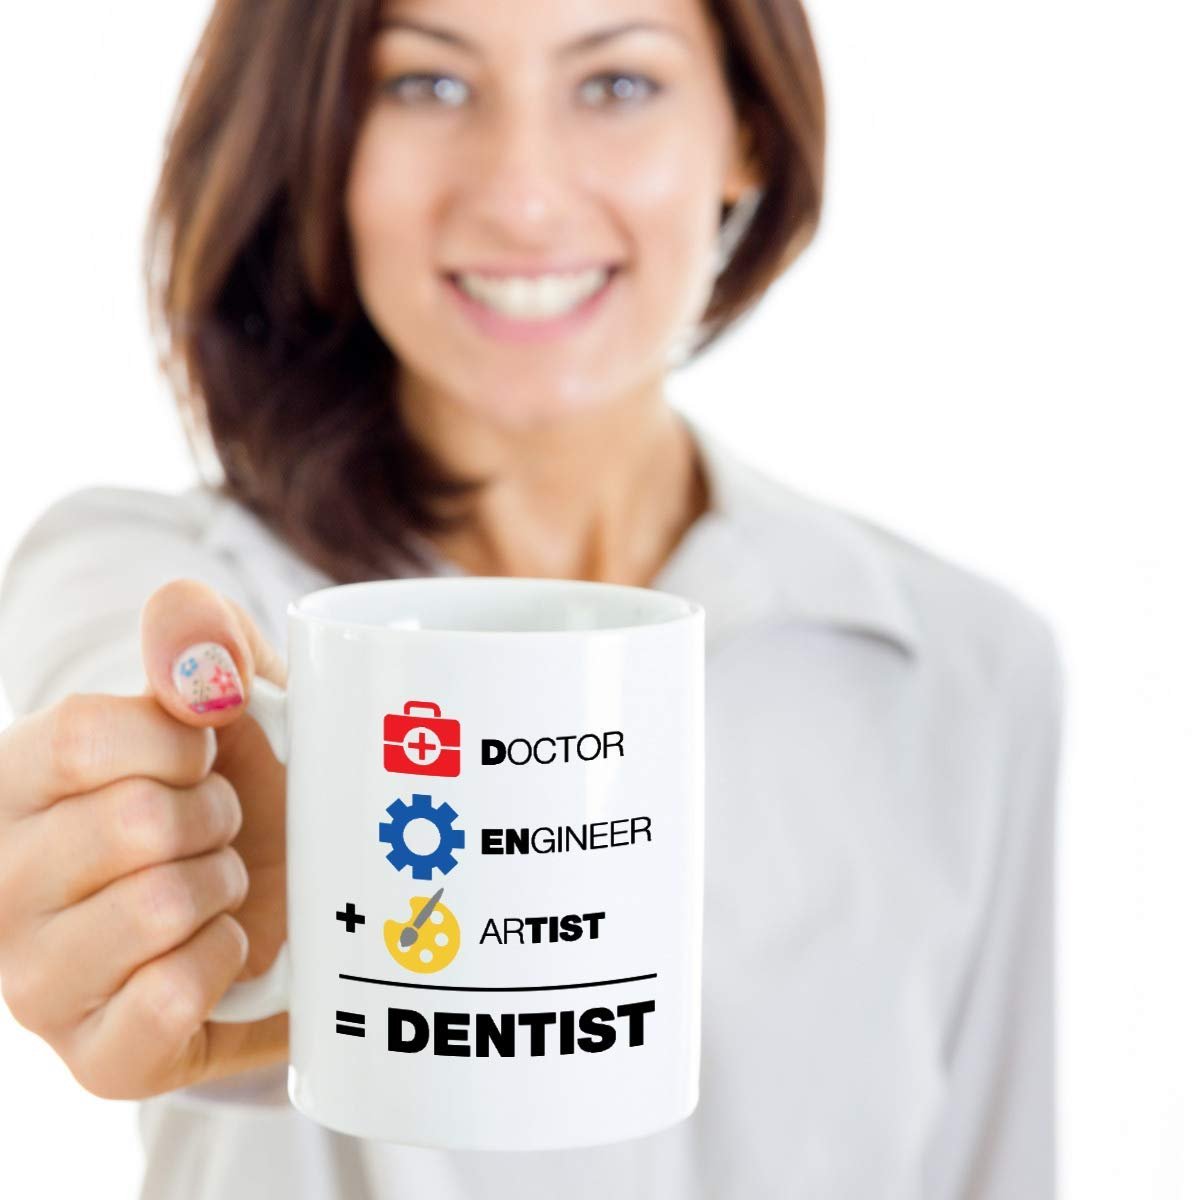 A Doctor, An Engineer & An Artist Is Equal To A Dentist Funny Equation Themed Coffee & Tea Gift Mug Cup, Home Décor, Office Decoration, Stuff & Christmas Or Graduation Gifts For Men & Women Dentists - image 2 of 4